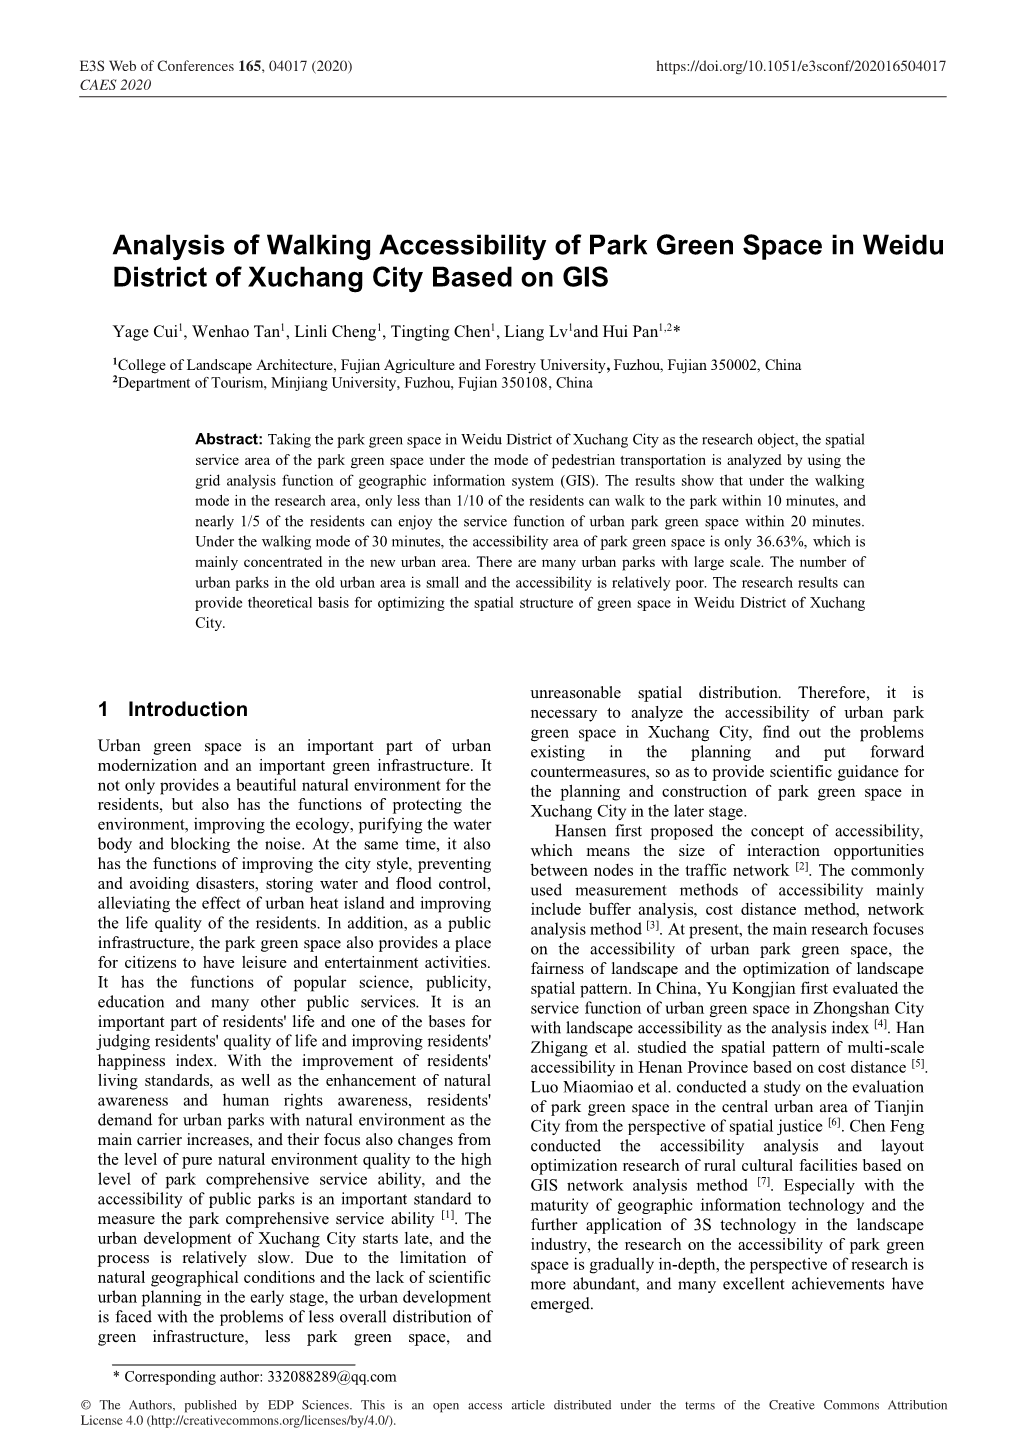 Analysis of Walking Accessibility of Park Green Space in Weidu District of Xuchang City Based on GIS